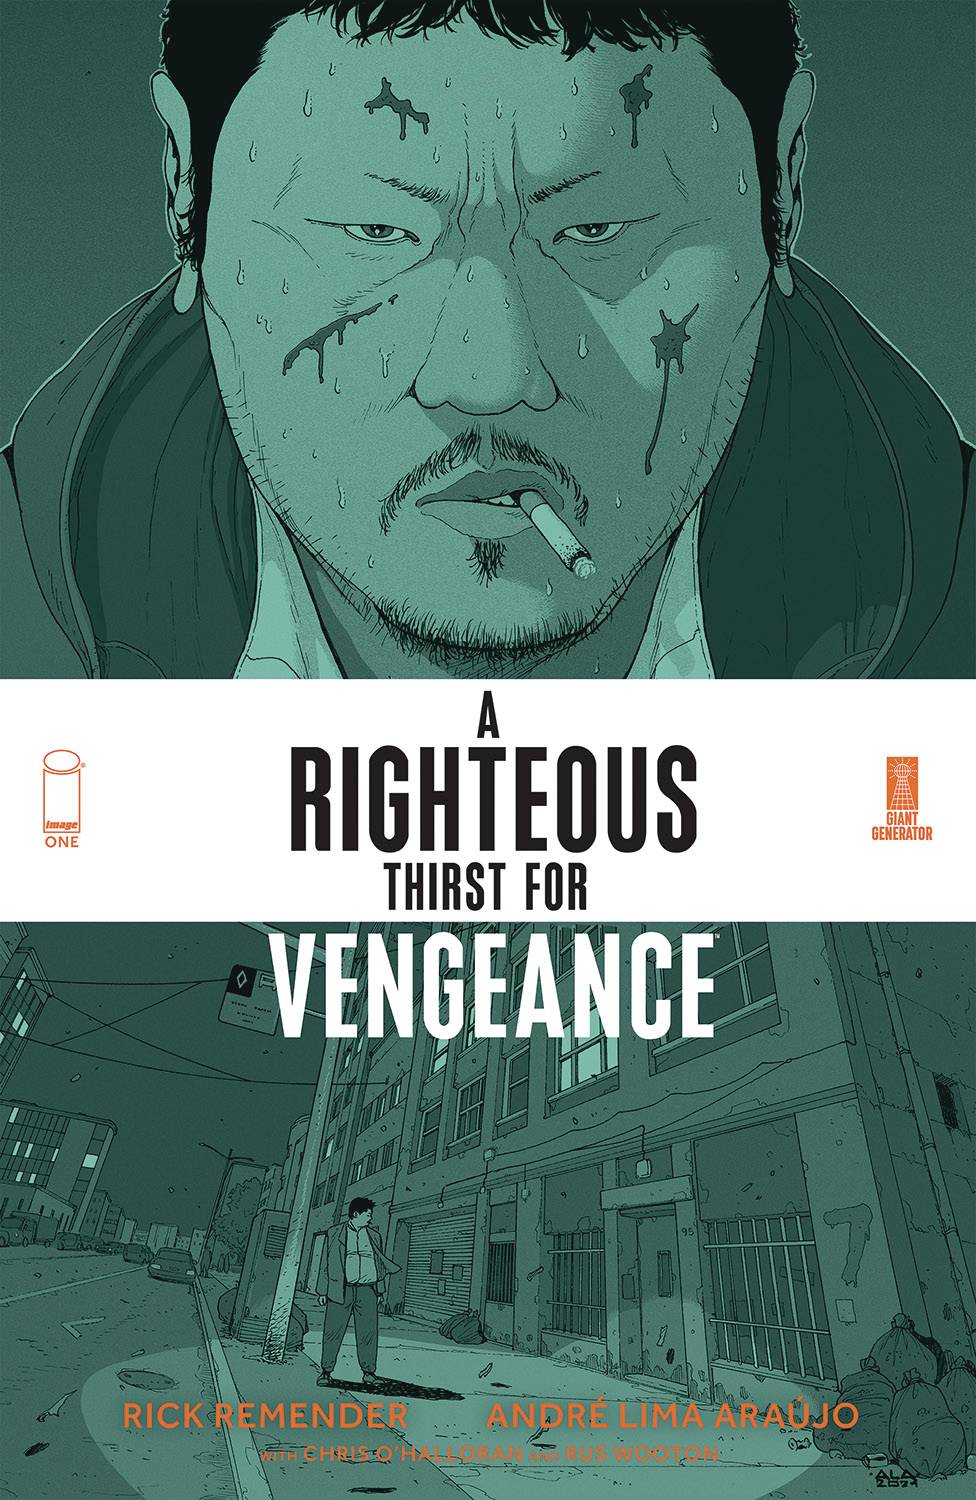 A Righteous Thirst for Vengeance (2021) Volume 1